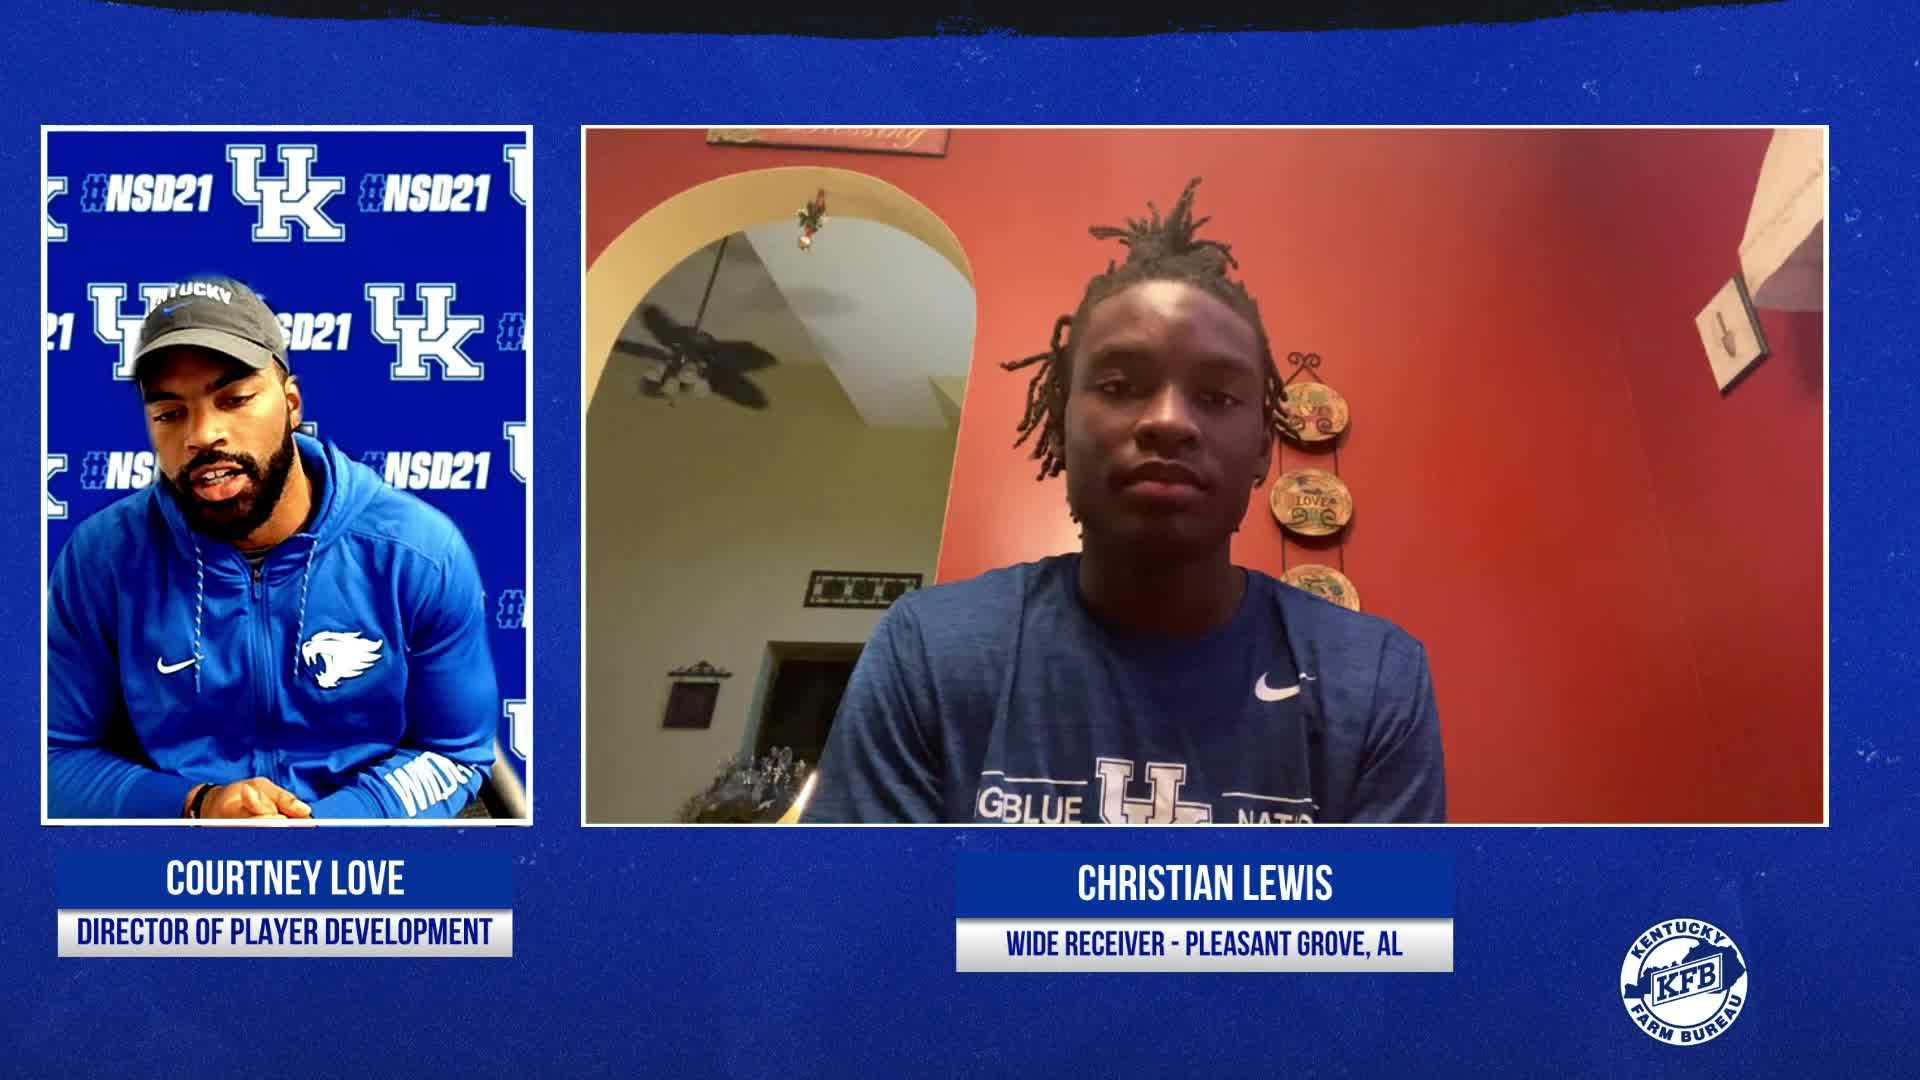 FB: Christian Lewis - Signing Day interview